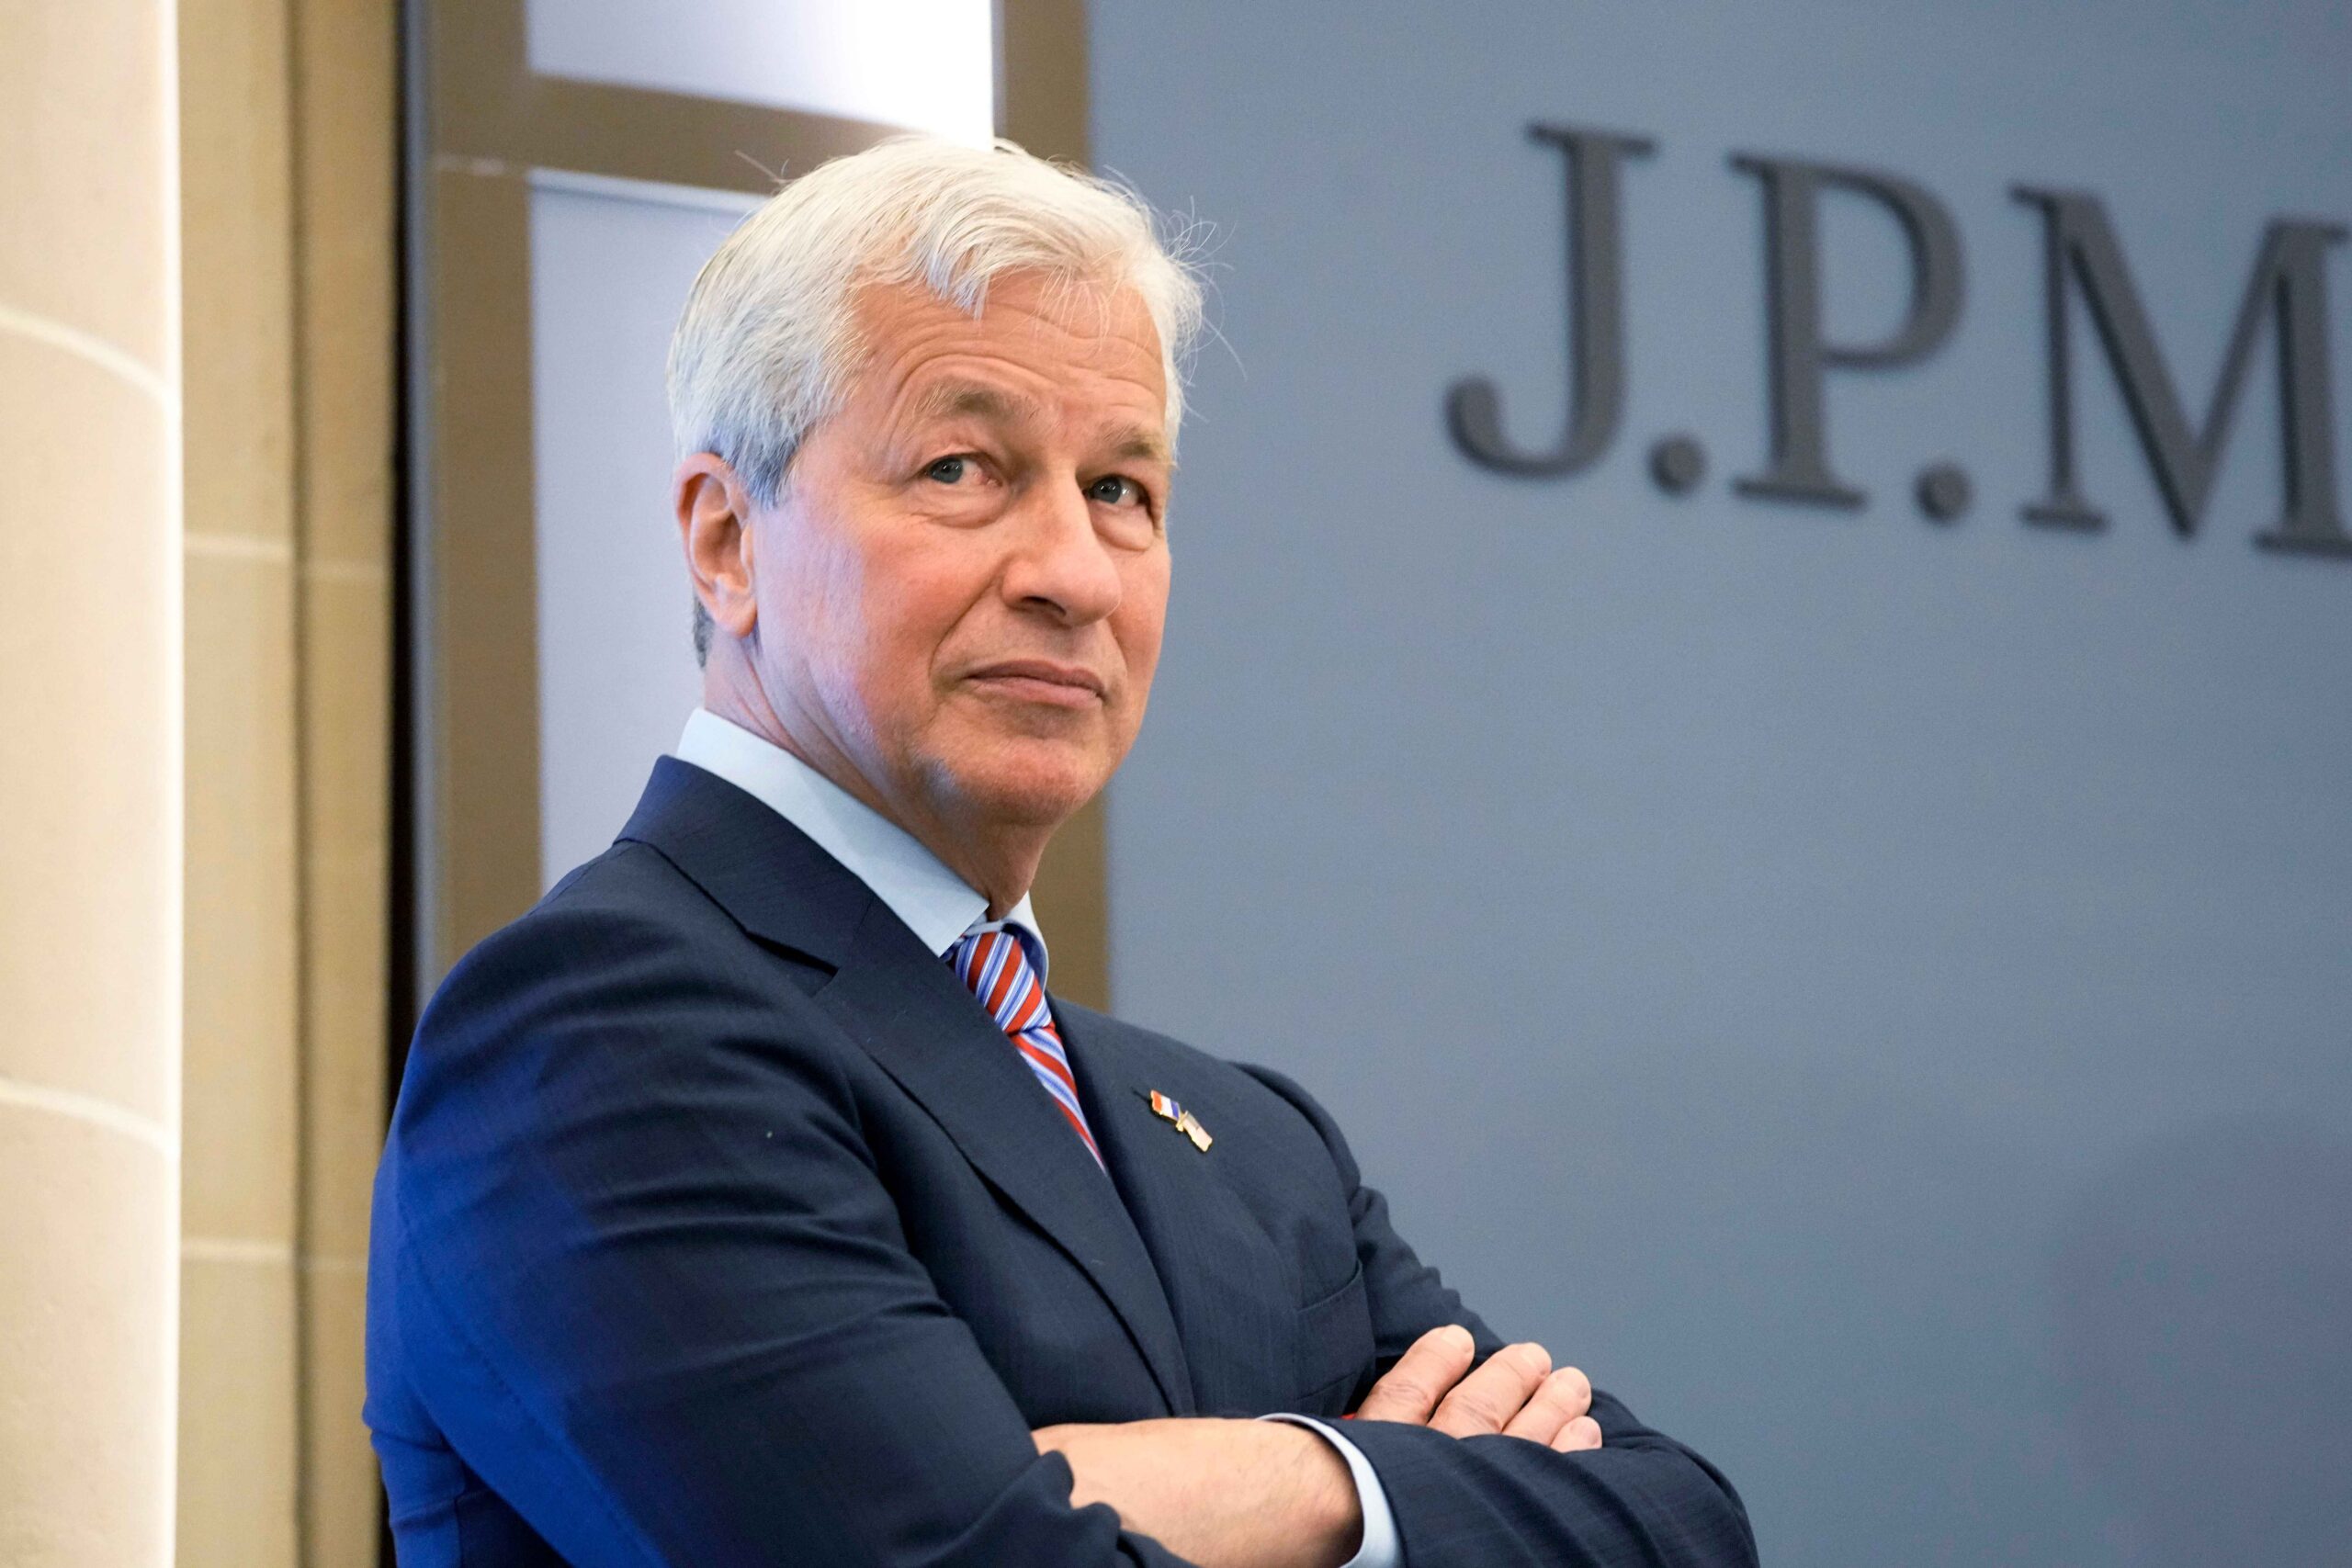 Jamie Dimon, a longtime Democrat ally, has been privately advising former South Carolina Governor Nikki Haley on the national debt and the global economy. (AP Photo/Michel Euler, Pool, File)